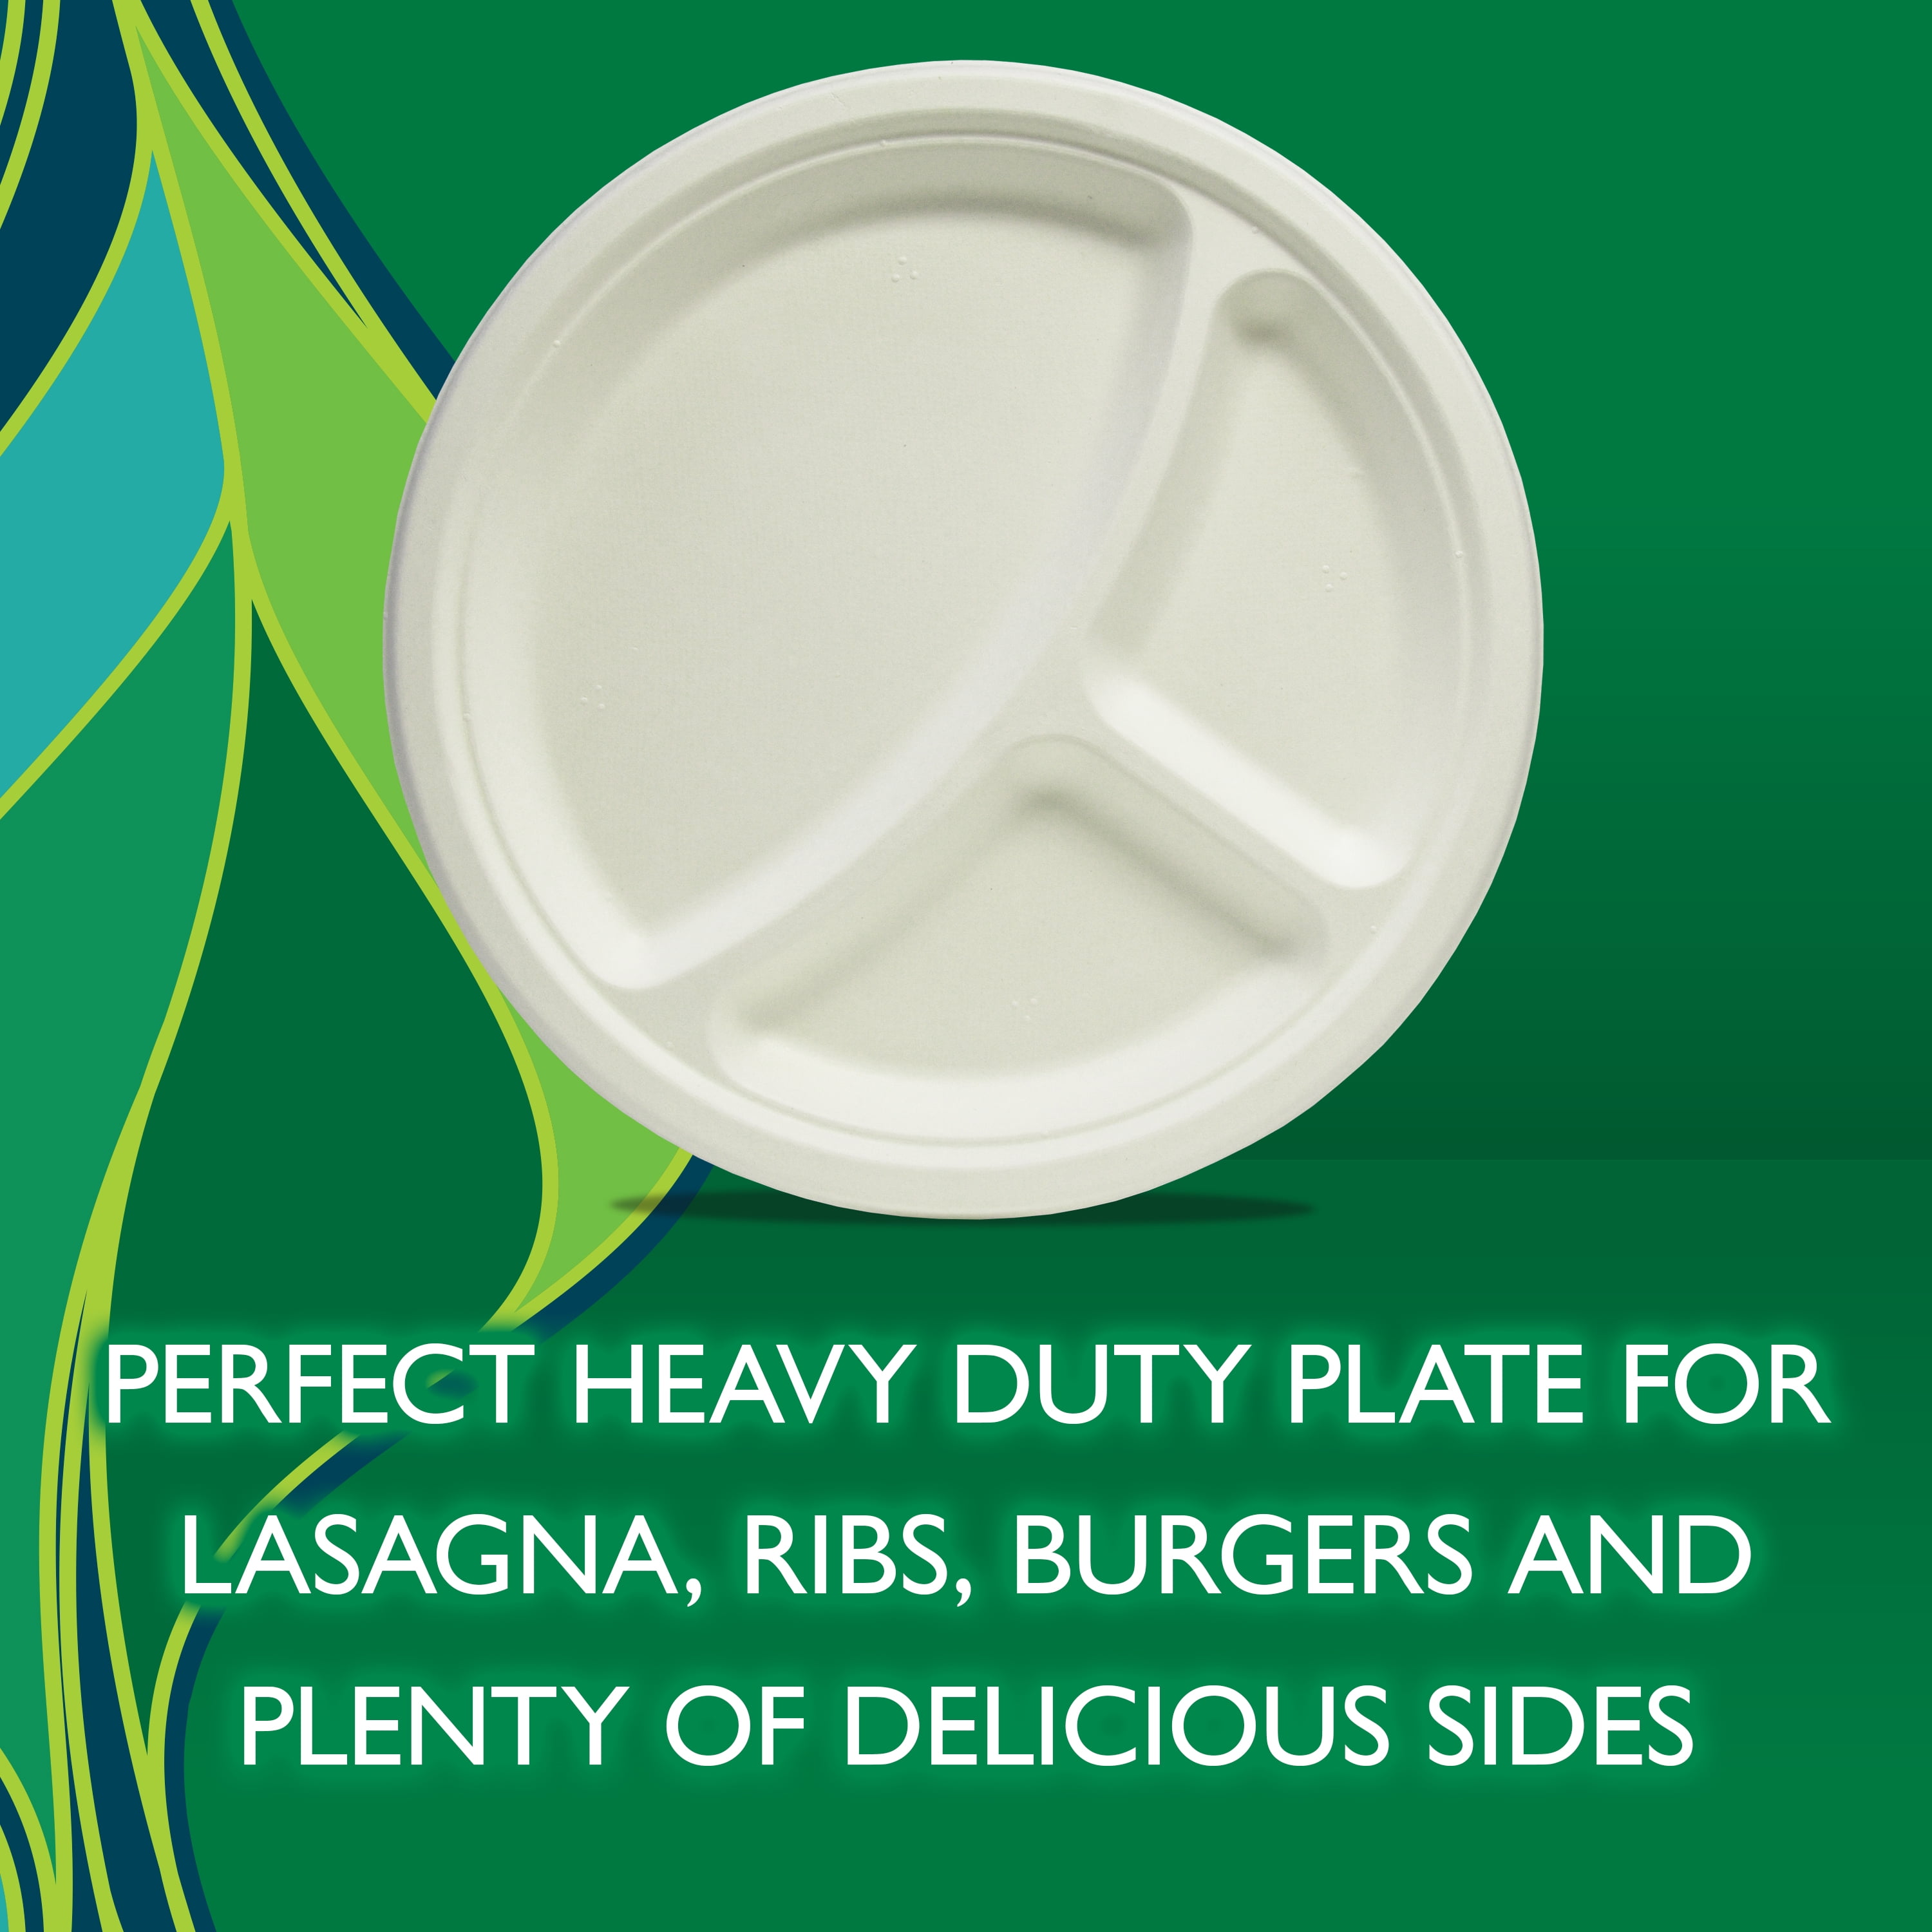 Hefty EcoSave 100% Compostable 10.13 in. Plates 16 ct Pack 16 ct